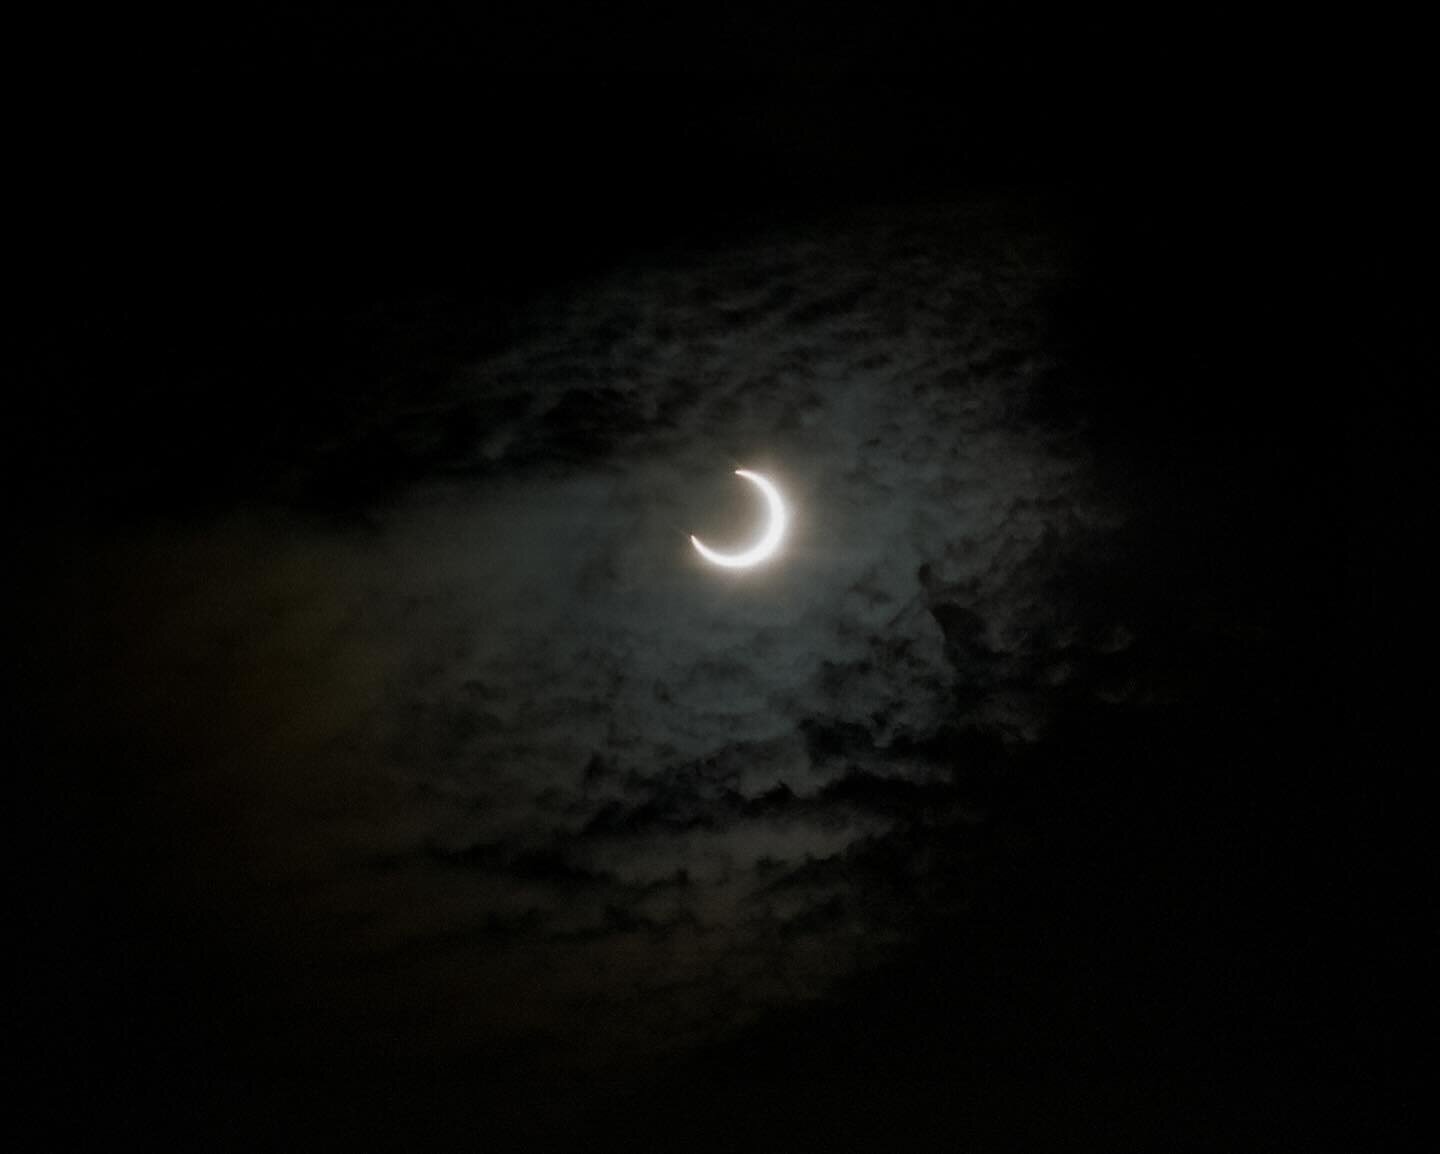 So, once upon a time there was an eclipse. I decided to take some photos of it, with zero knowledge of how or correct equipment. Mostly I was using my camera to look at it indirectly, and then I pushed the shutter a couple times. And&hellip; it worke